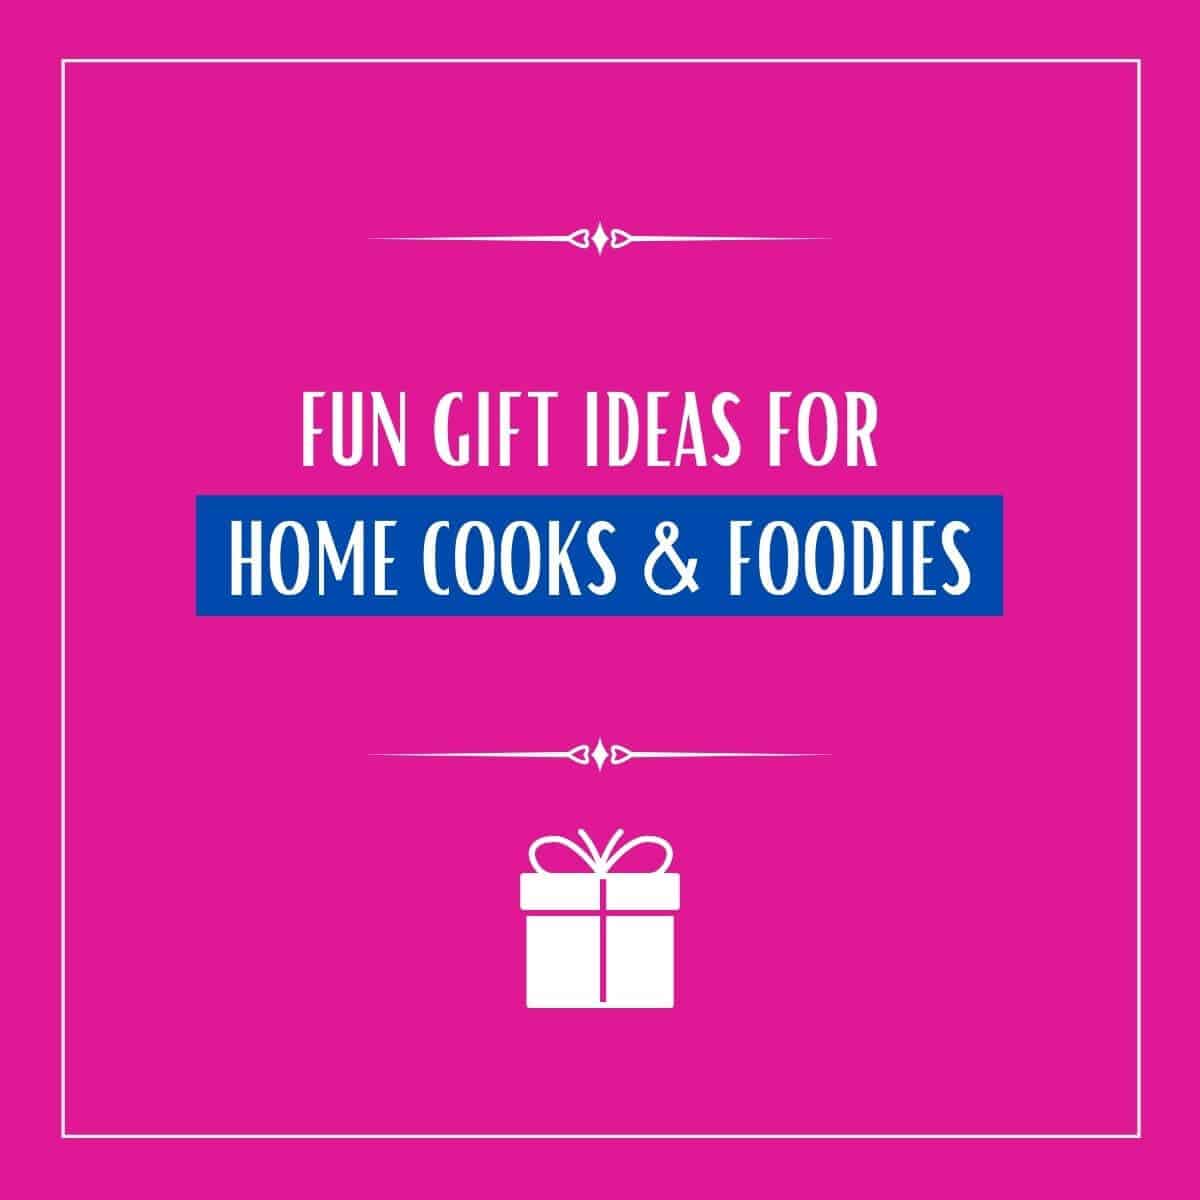 Fun gift ideas for home cooks and foodies